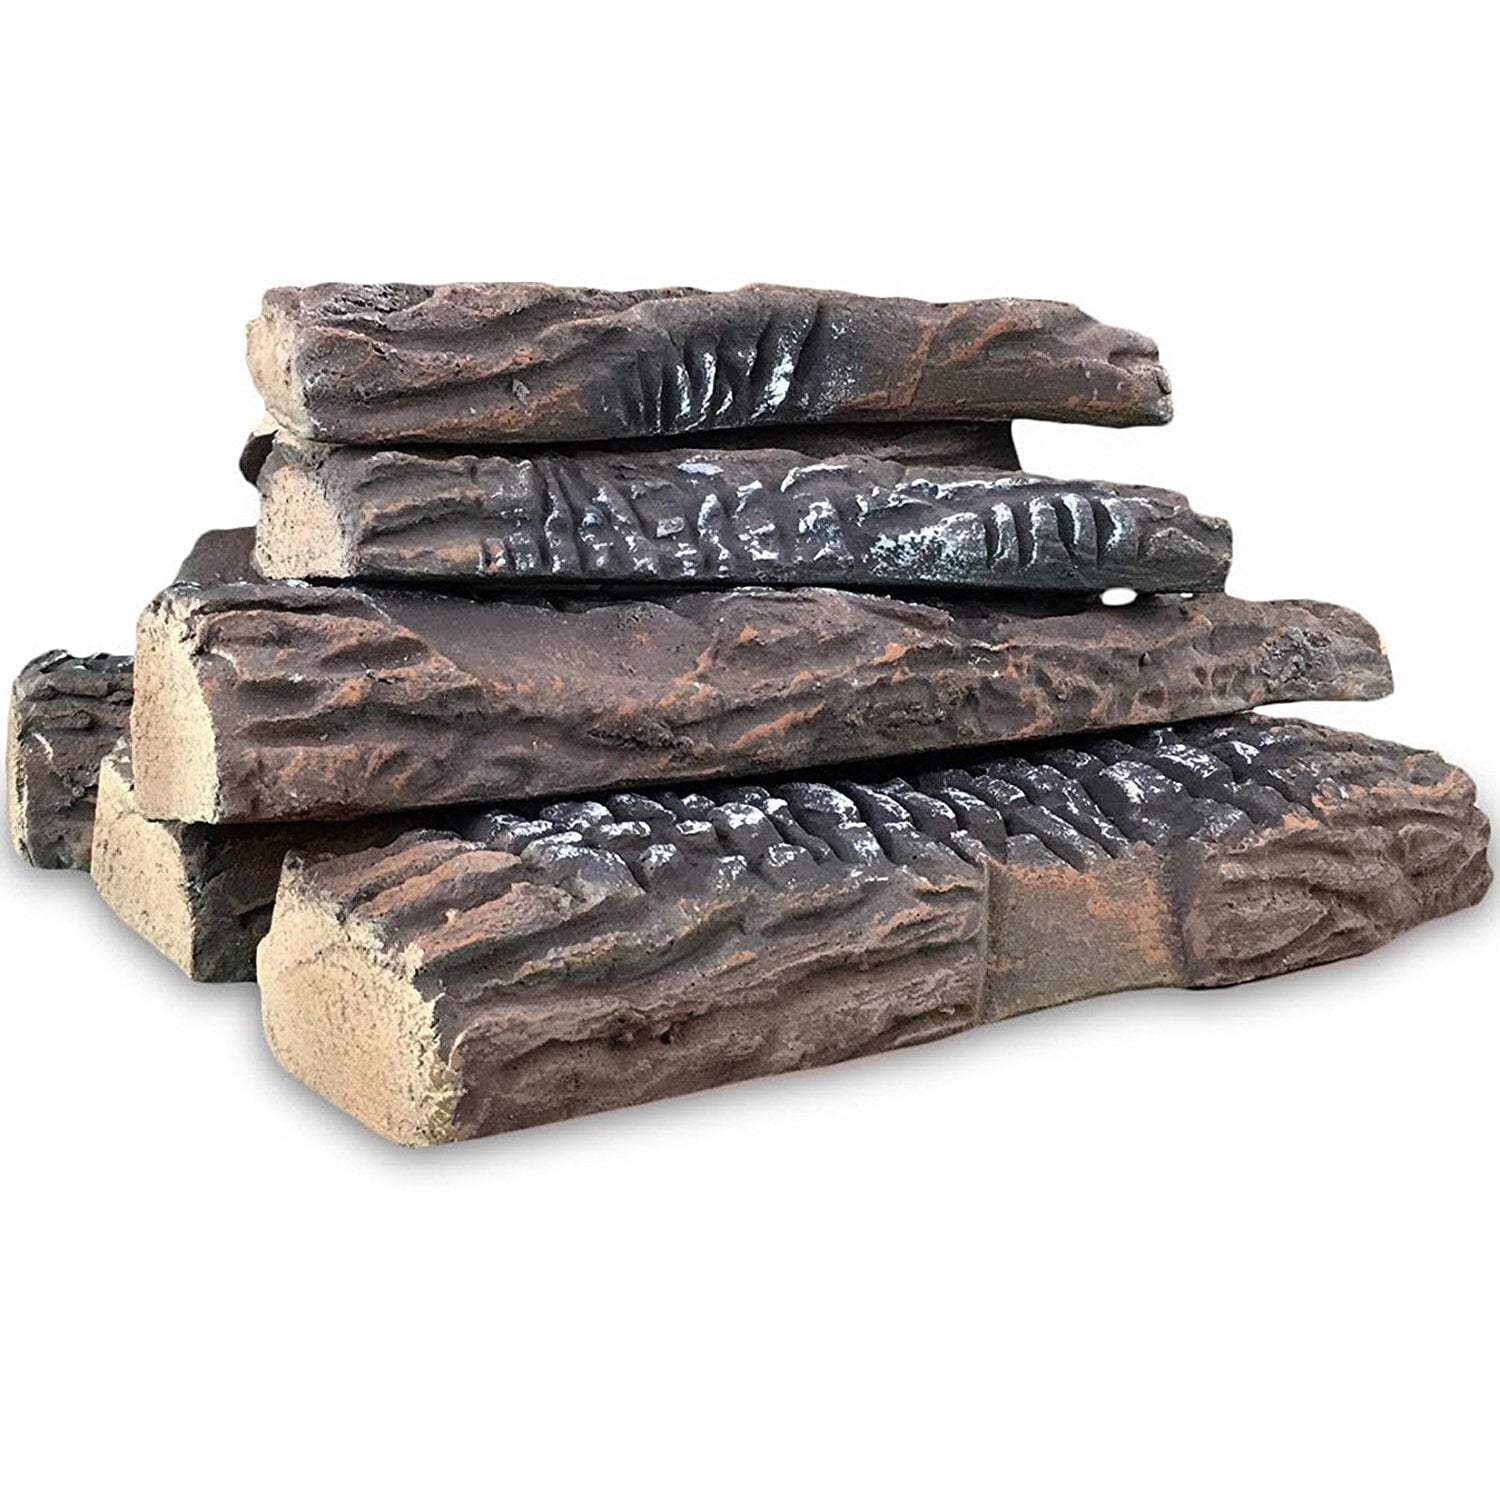 Regal Flame 10 Piece Set of Ceramic Wood Large Gas Fireplace Logs Logs for All Types of Indoor, Gas Inserts, Ventless & Vent Fre